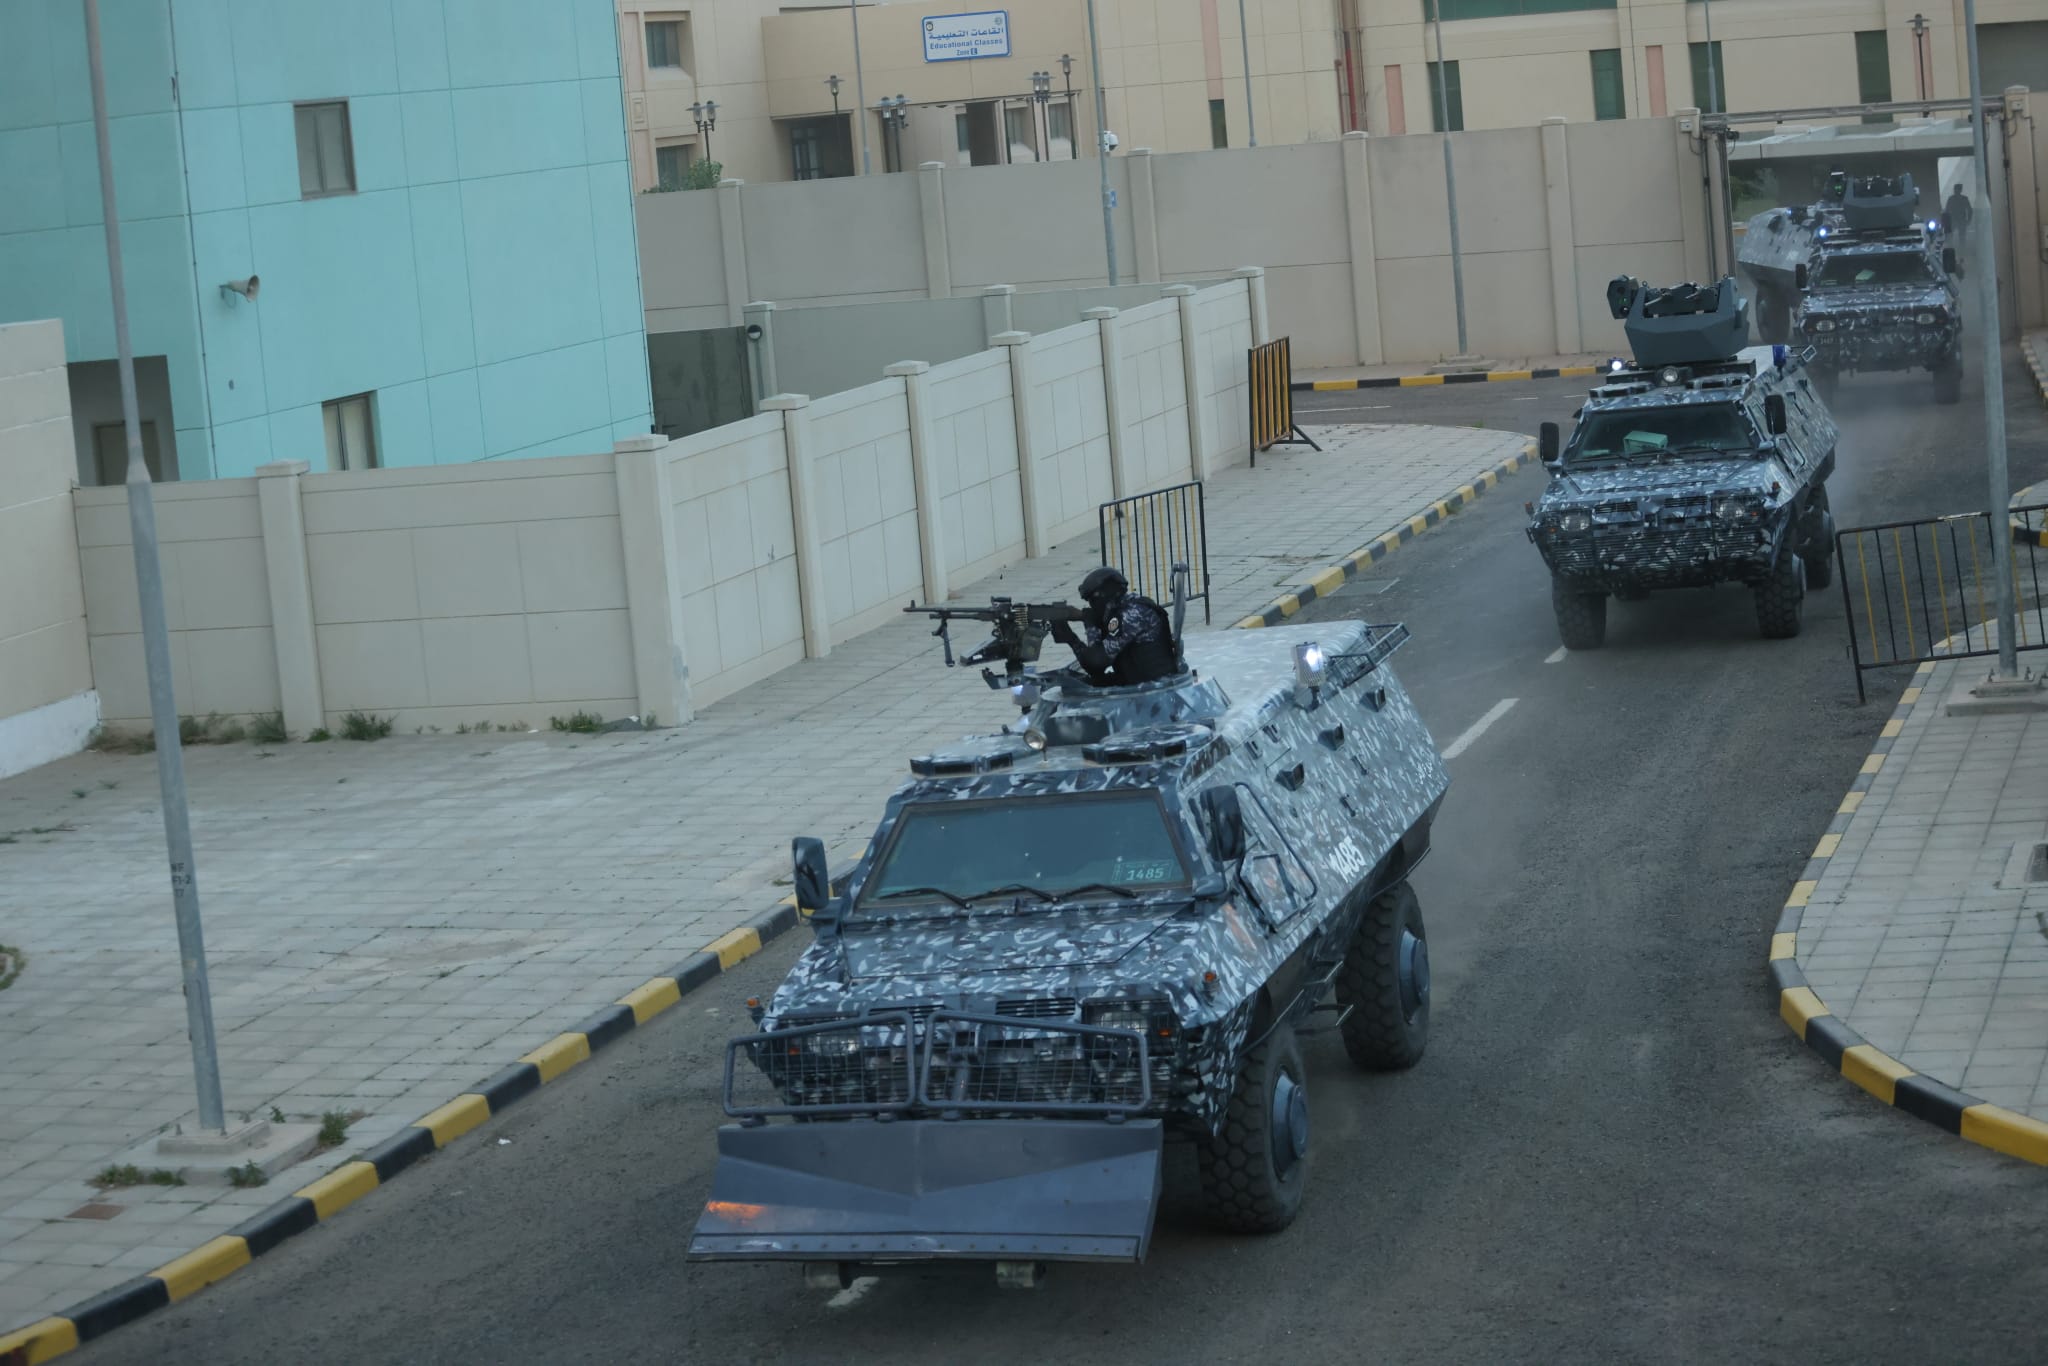 Mock drills demonstrate combat skills of Kuwait’s security forces